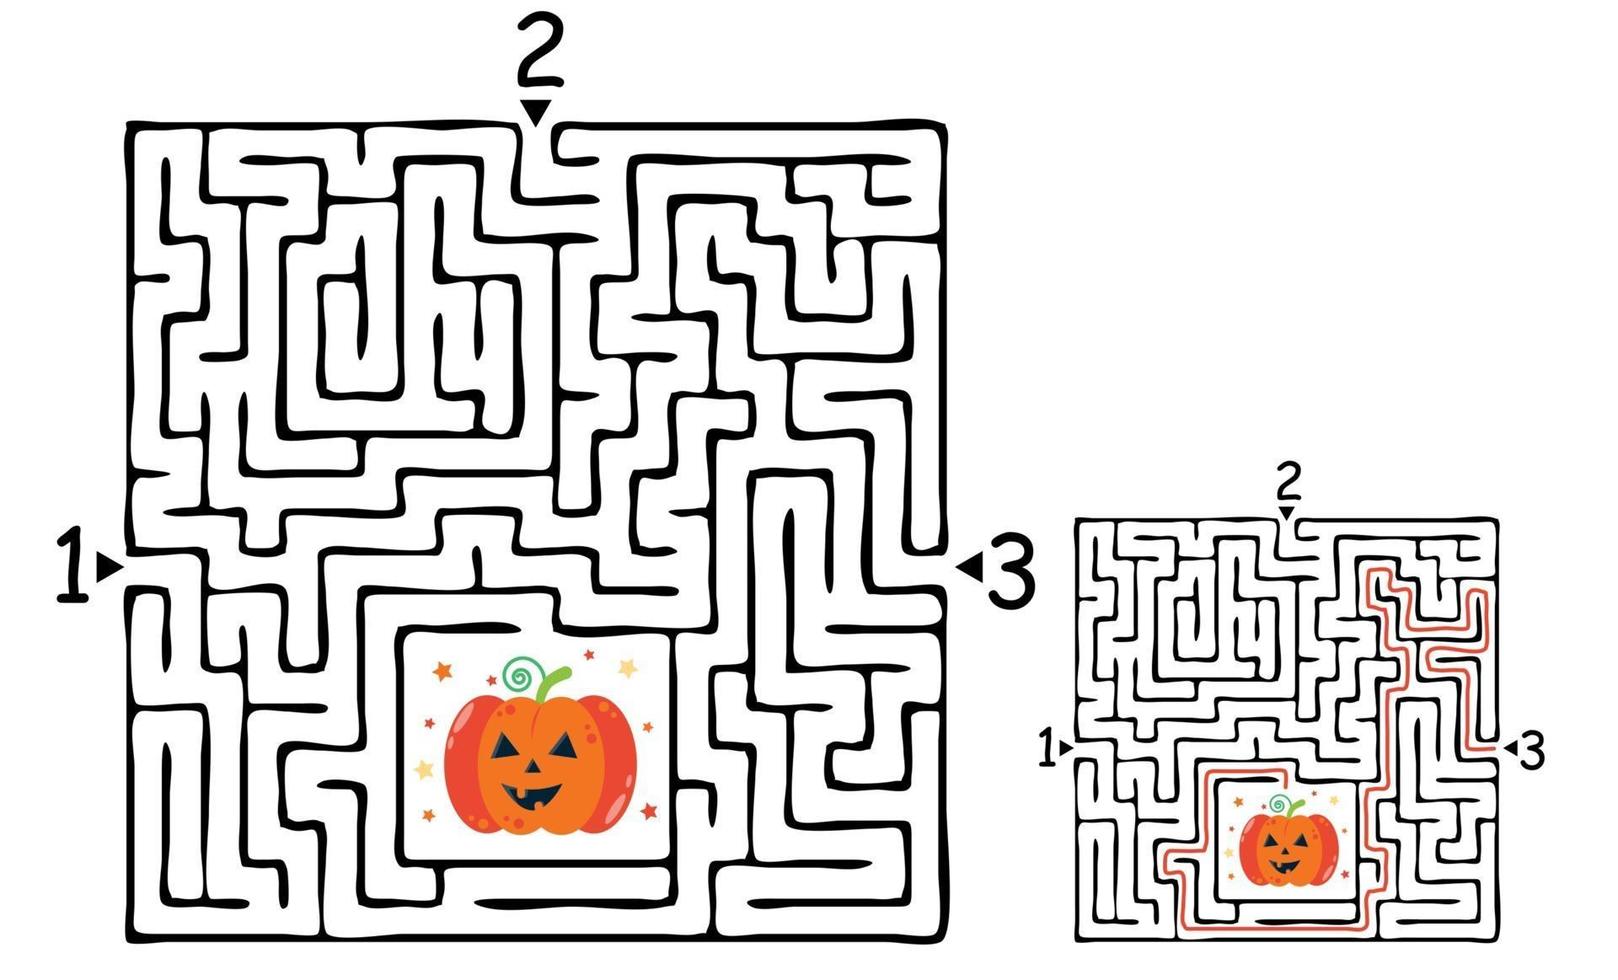 Square halloween maze labyrinth game for kids. Labyrinth logic vector